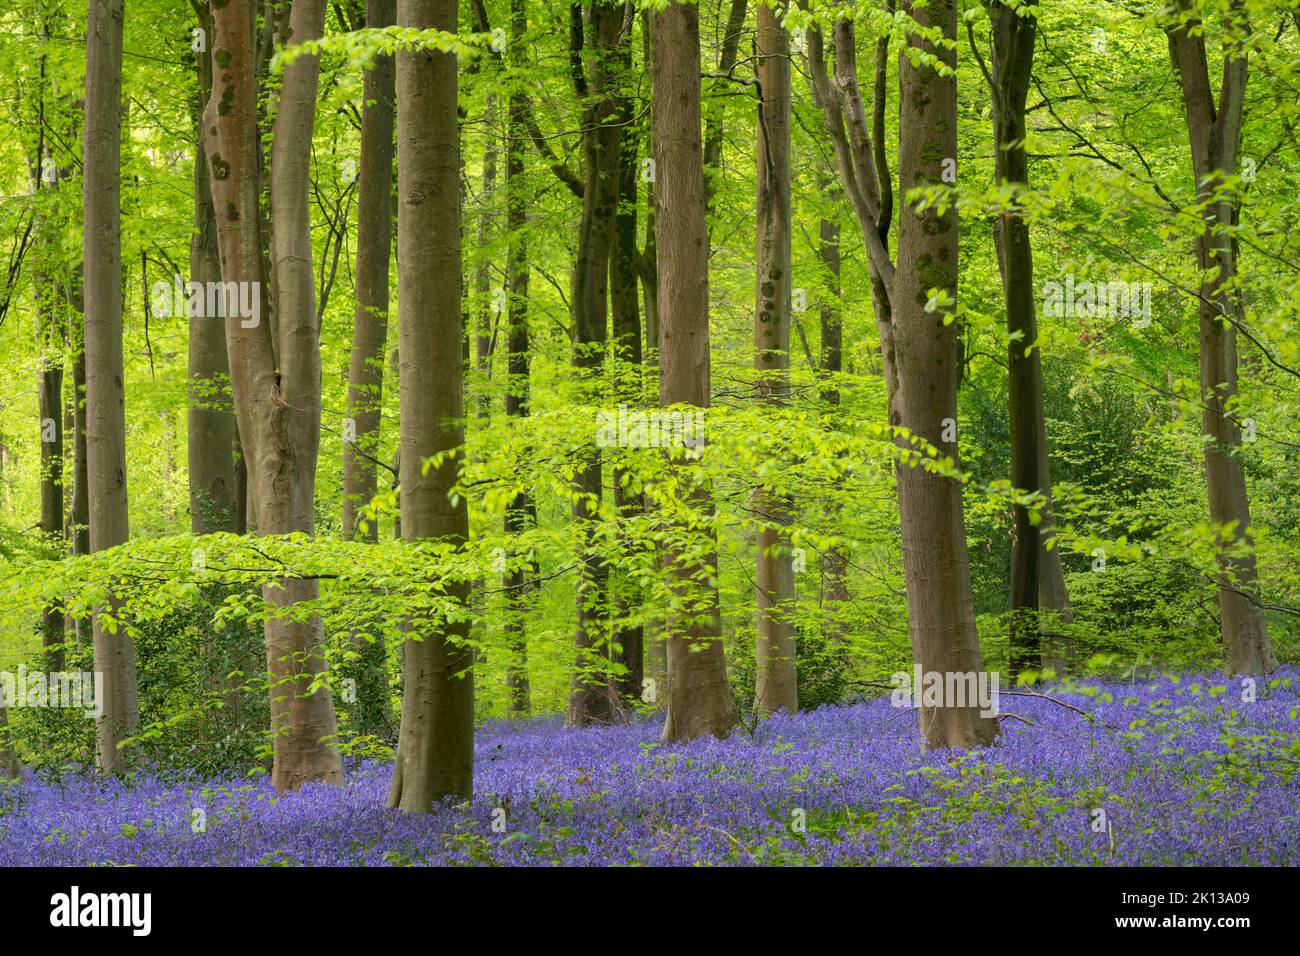 Carpets of bluebells in West Woods, Wiltshire, England, United Kingdom, Europe Stock Photo